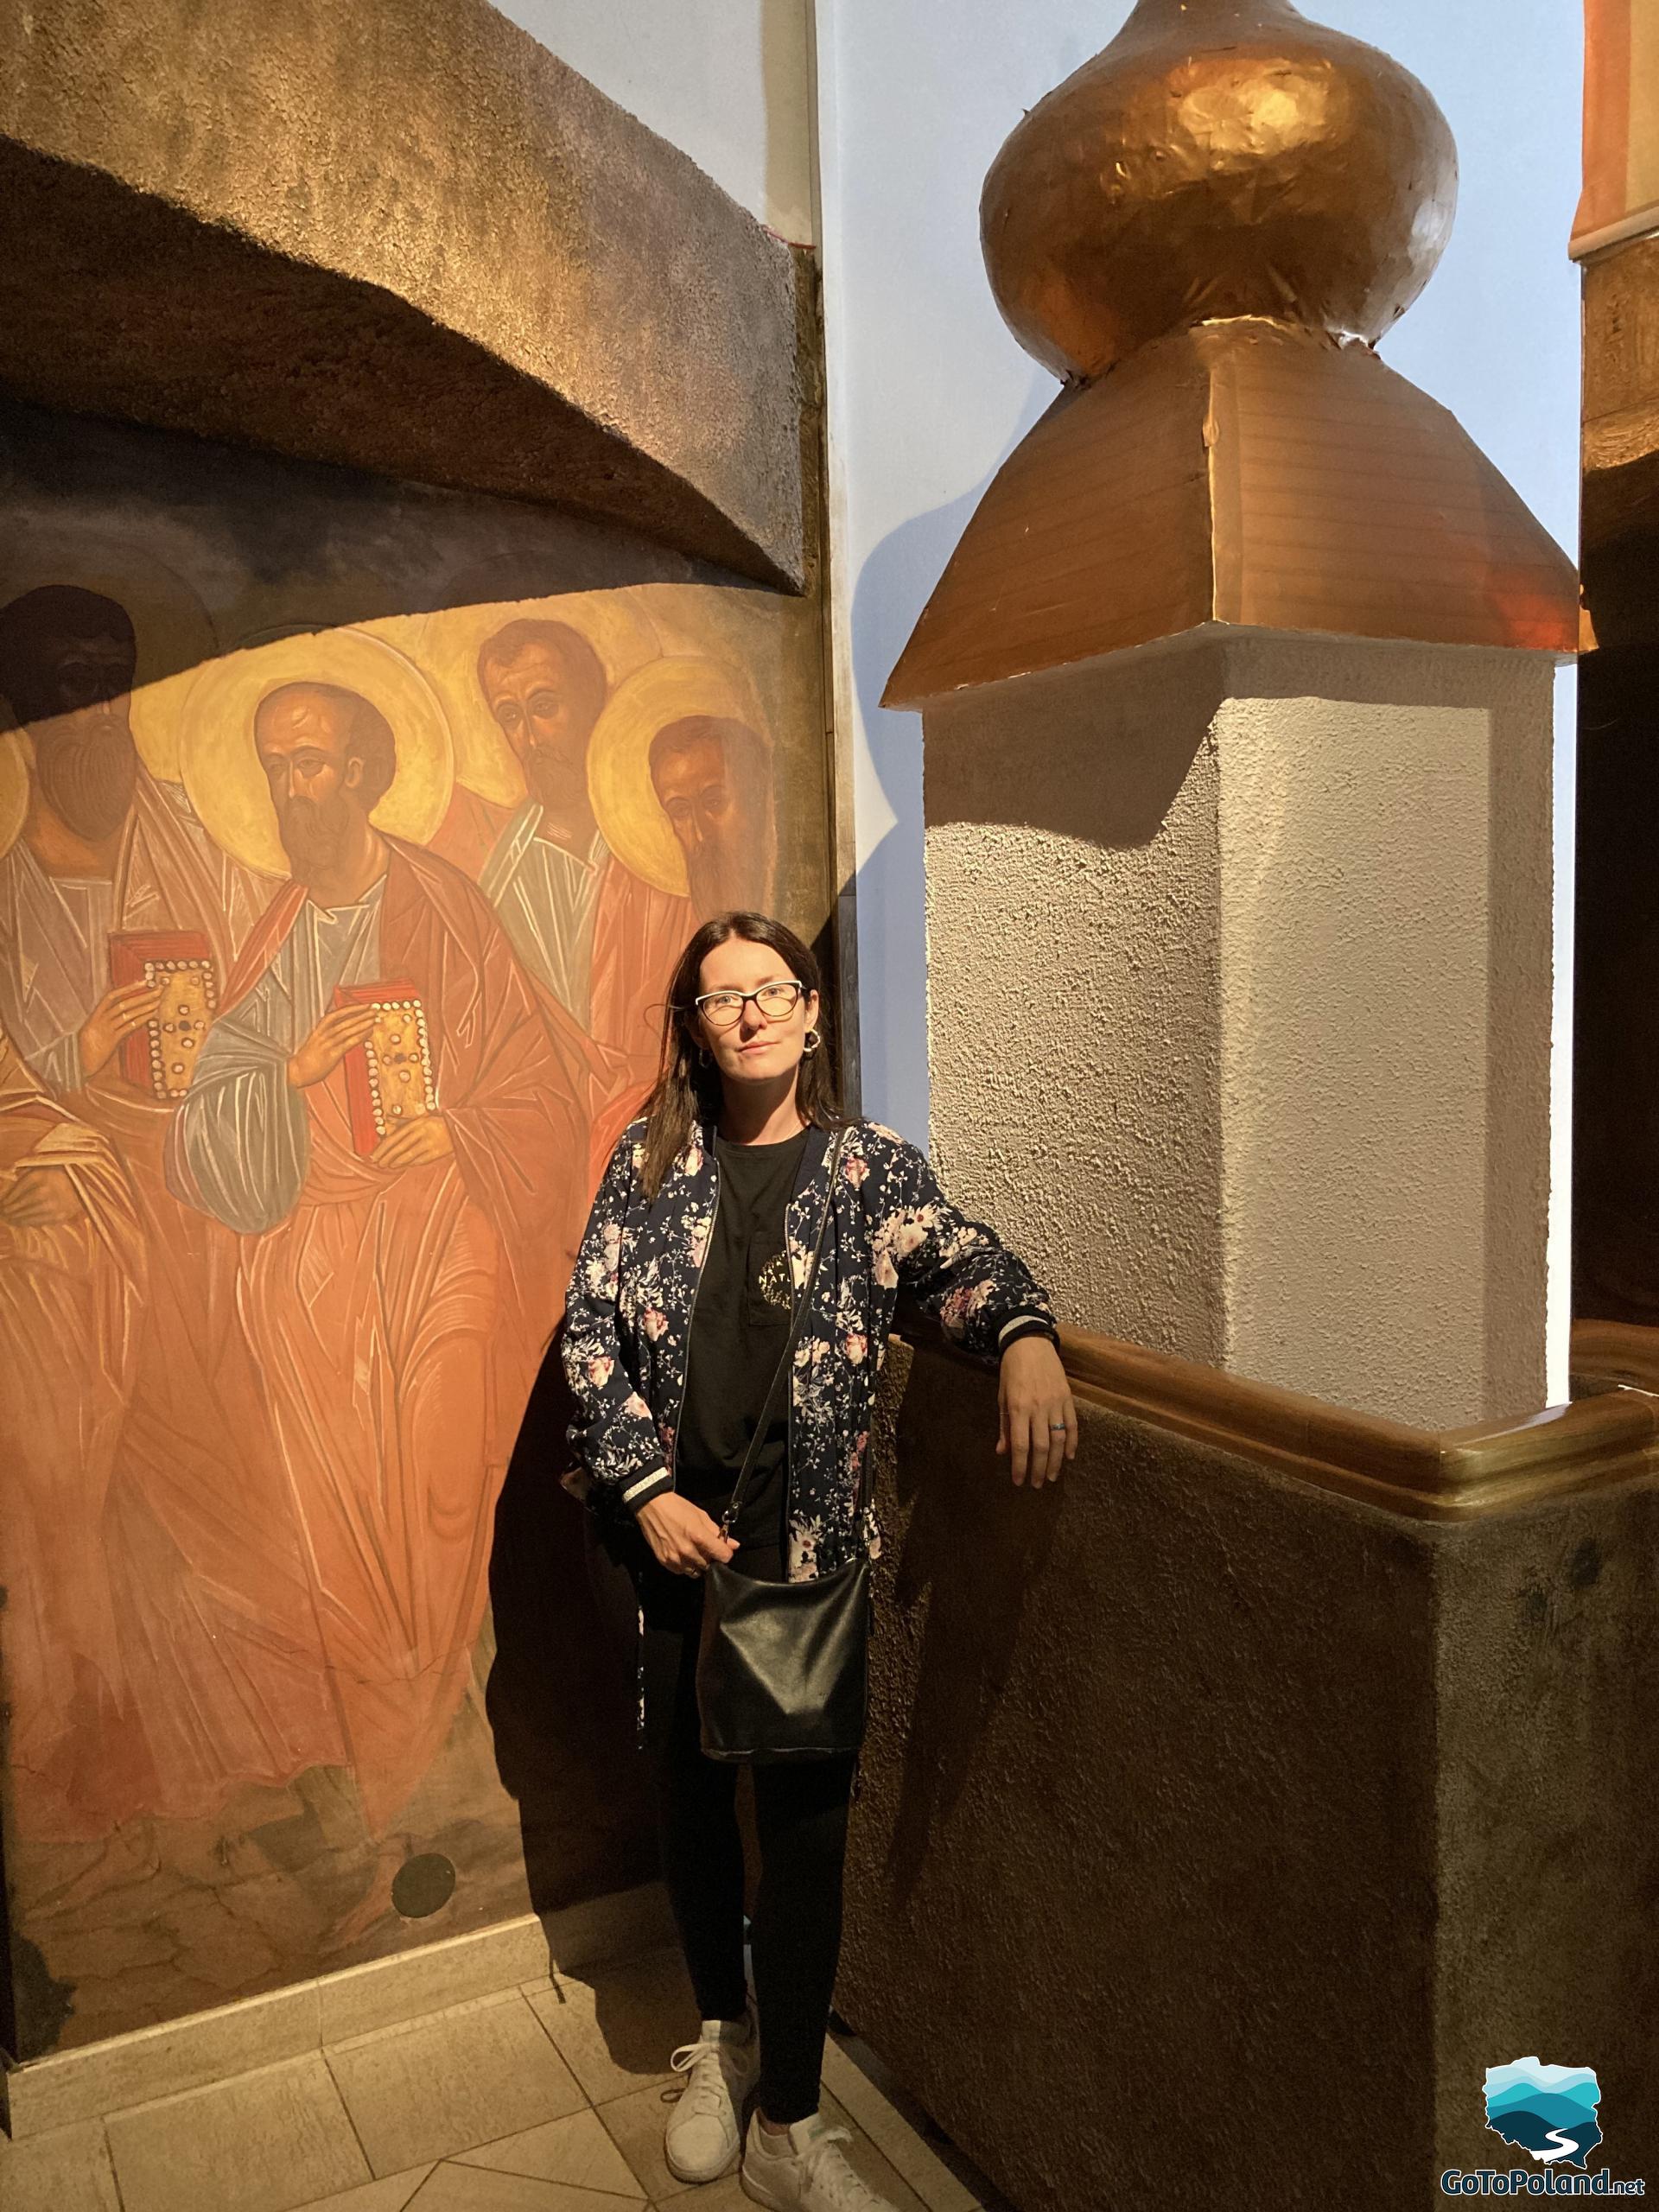 a woman stands in front of a wall on which images of saints are painted